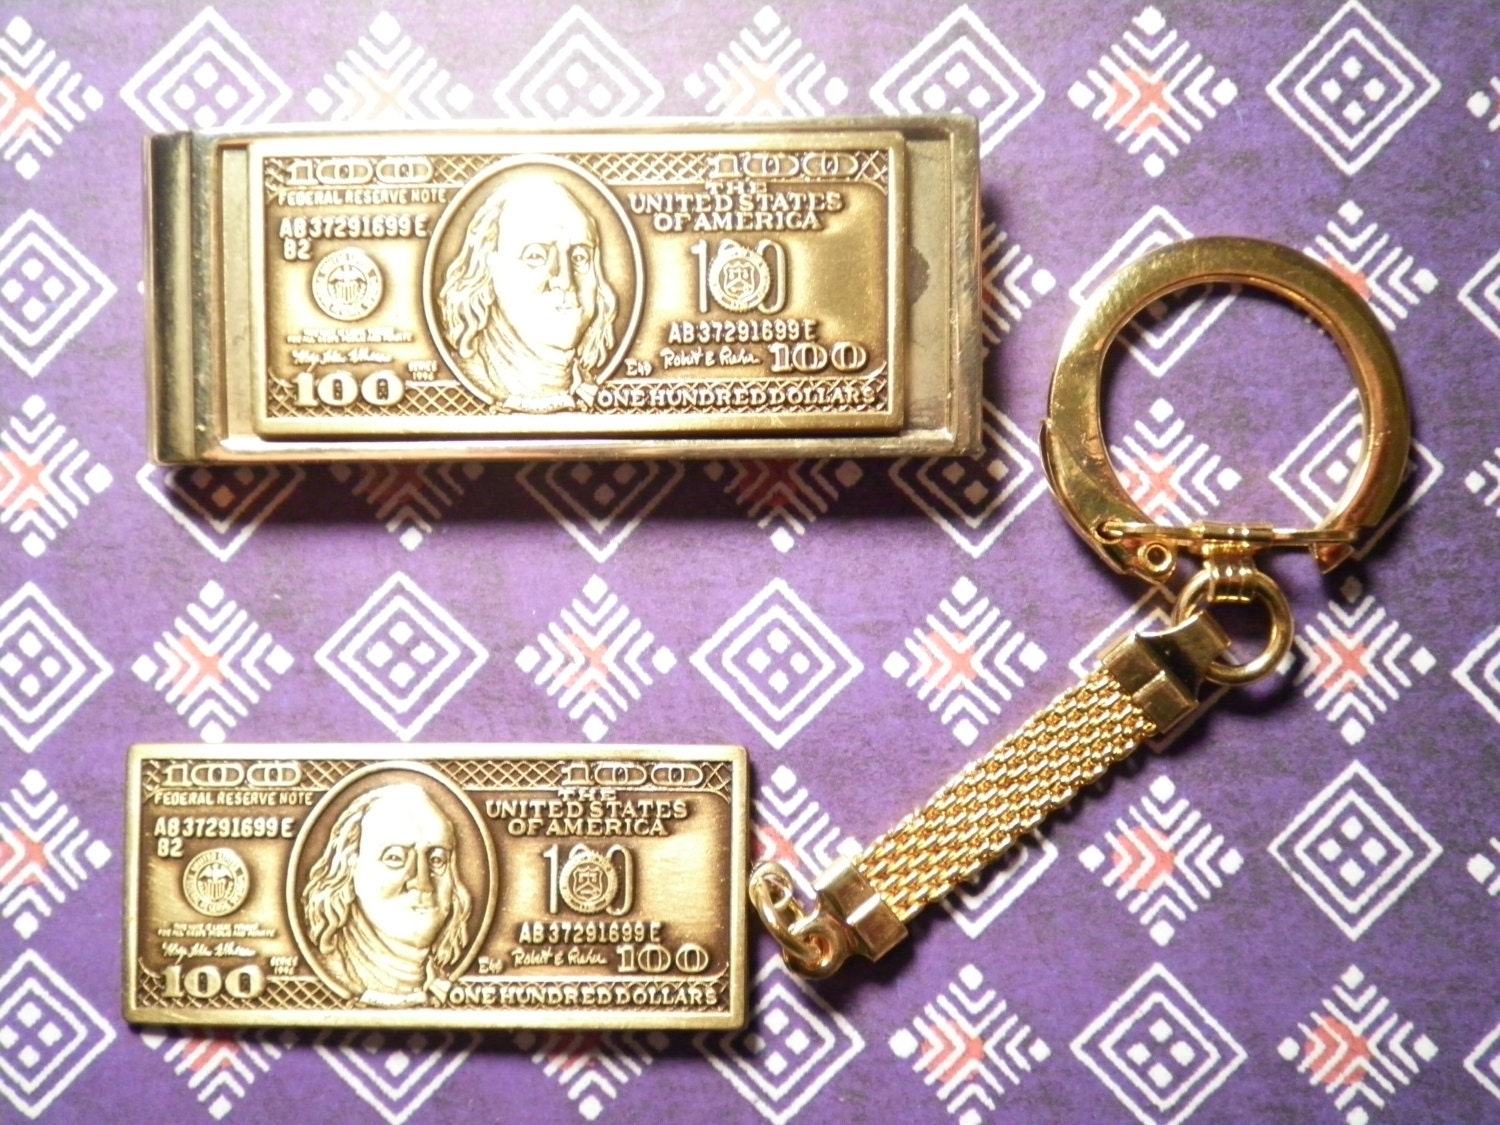 Gold Bar & $100 Hundred Dollar Bills Keychain & Charms Key Chain with Clip  Gift